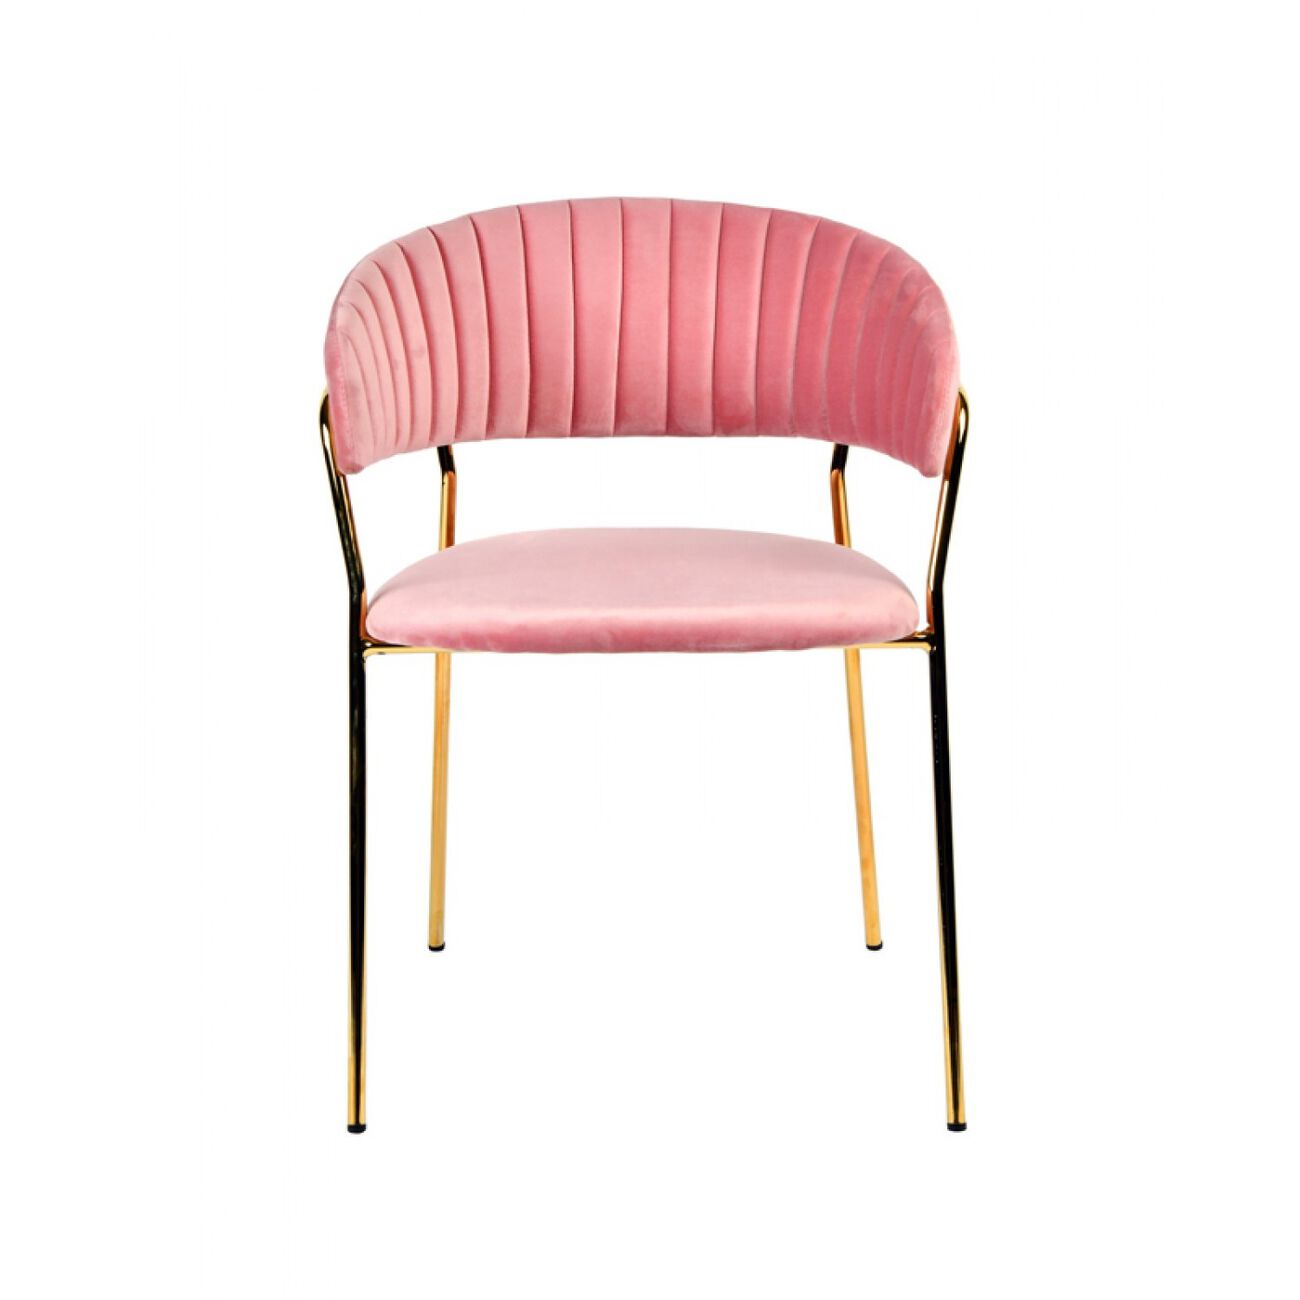 Fabric Upholstered Dining Chair with Metal Legs, Set of 2, Pink and Gold